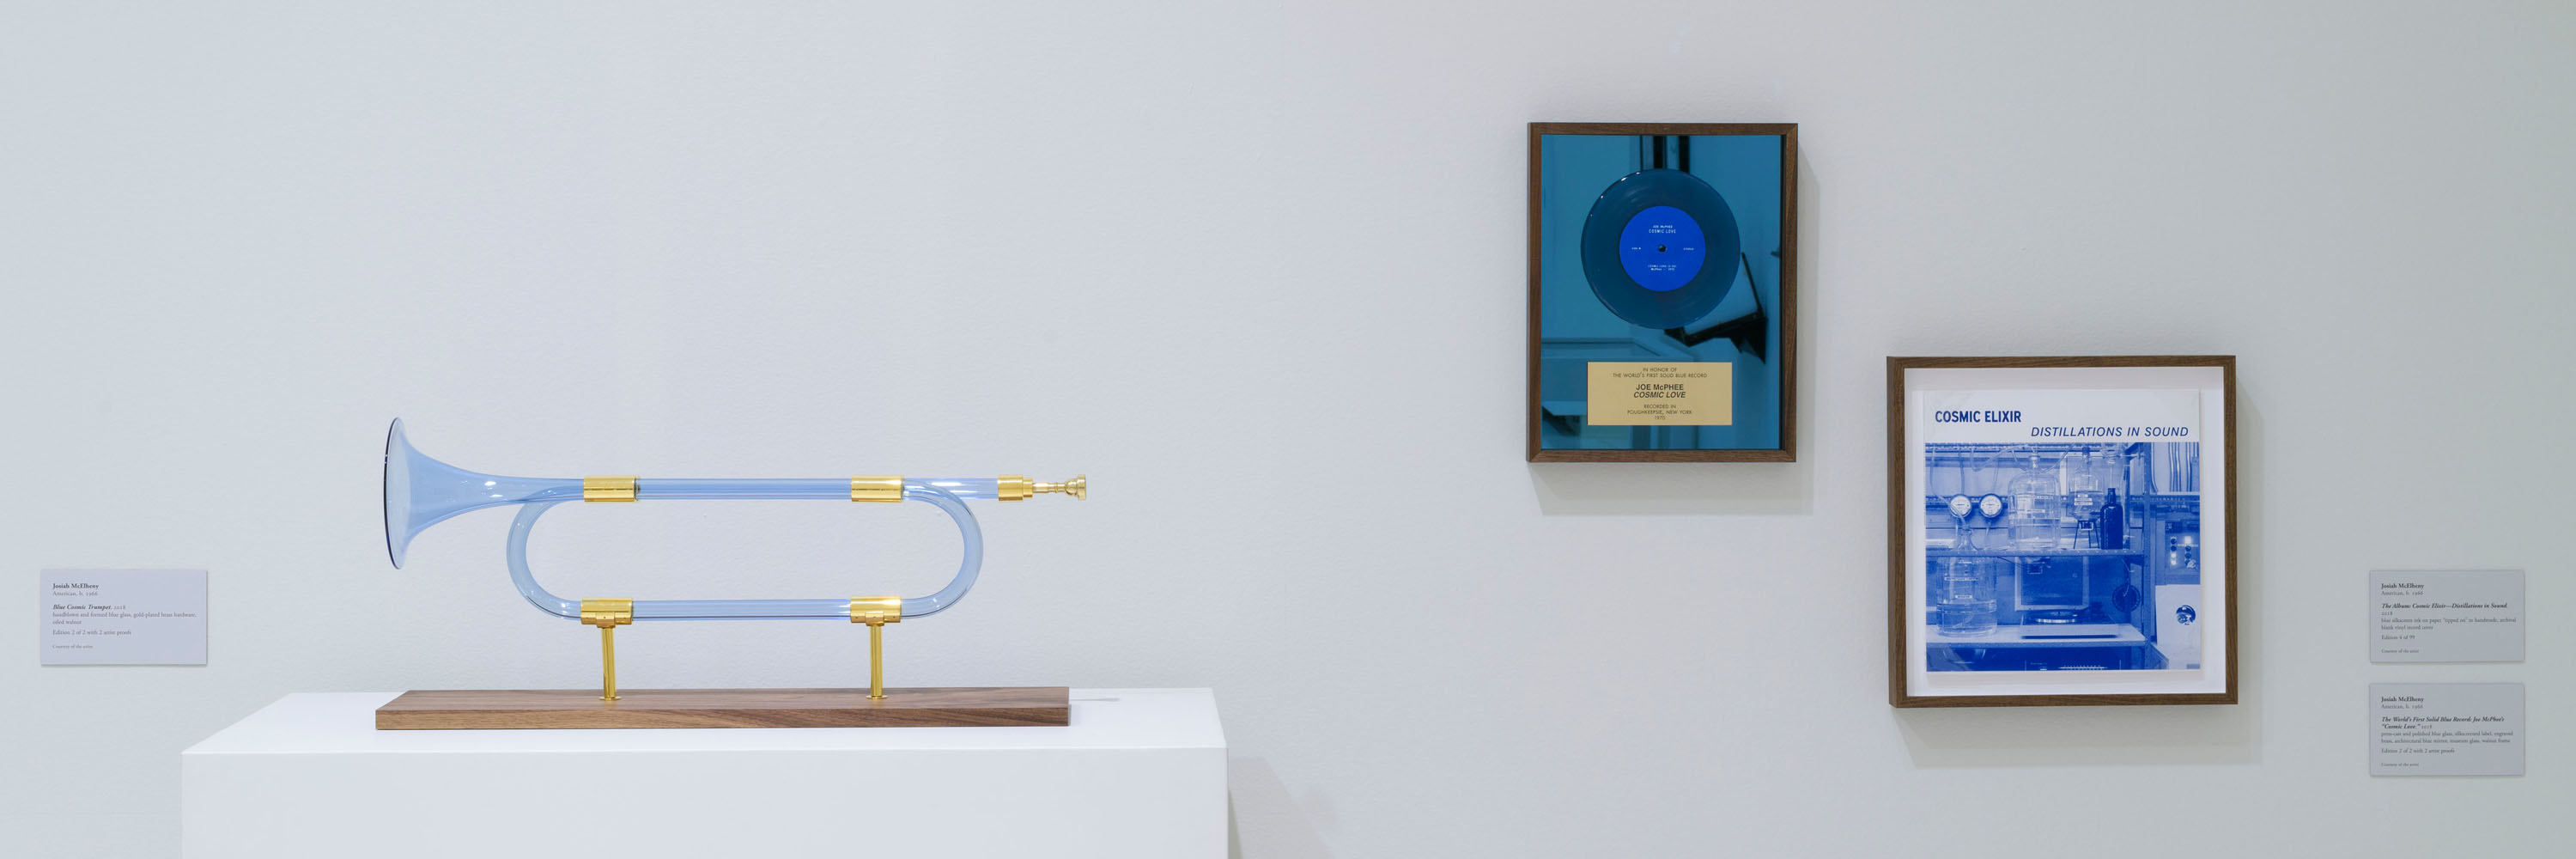 Blue glass horn, with blue record on the wall and a blue record album cover